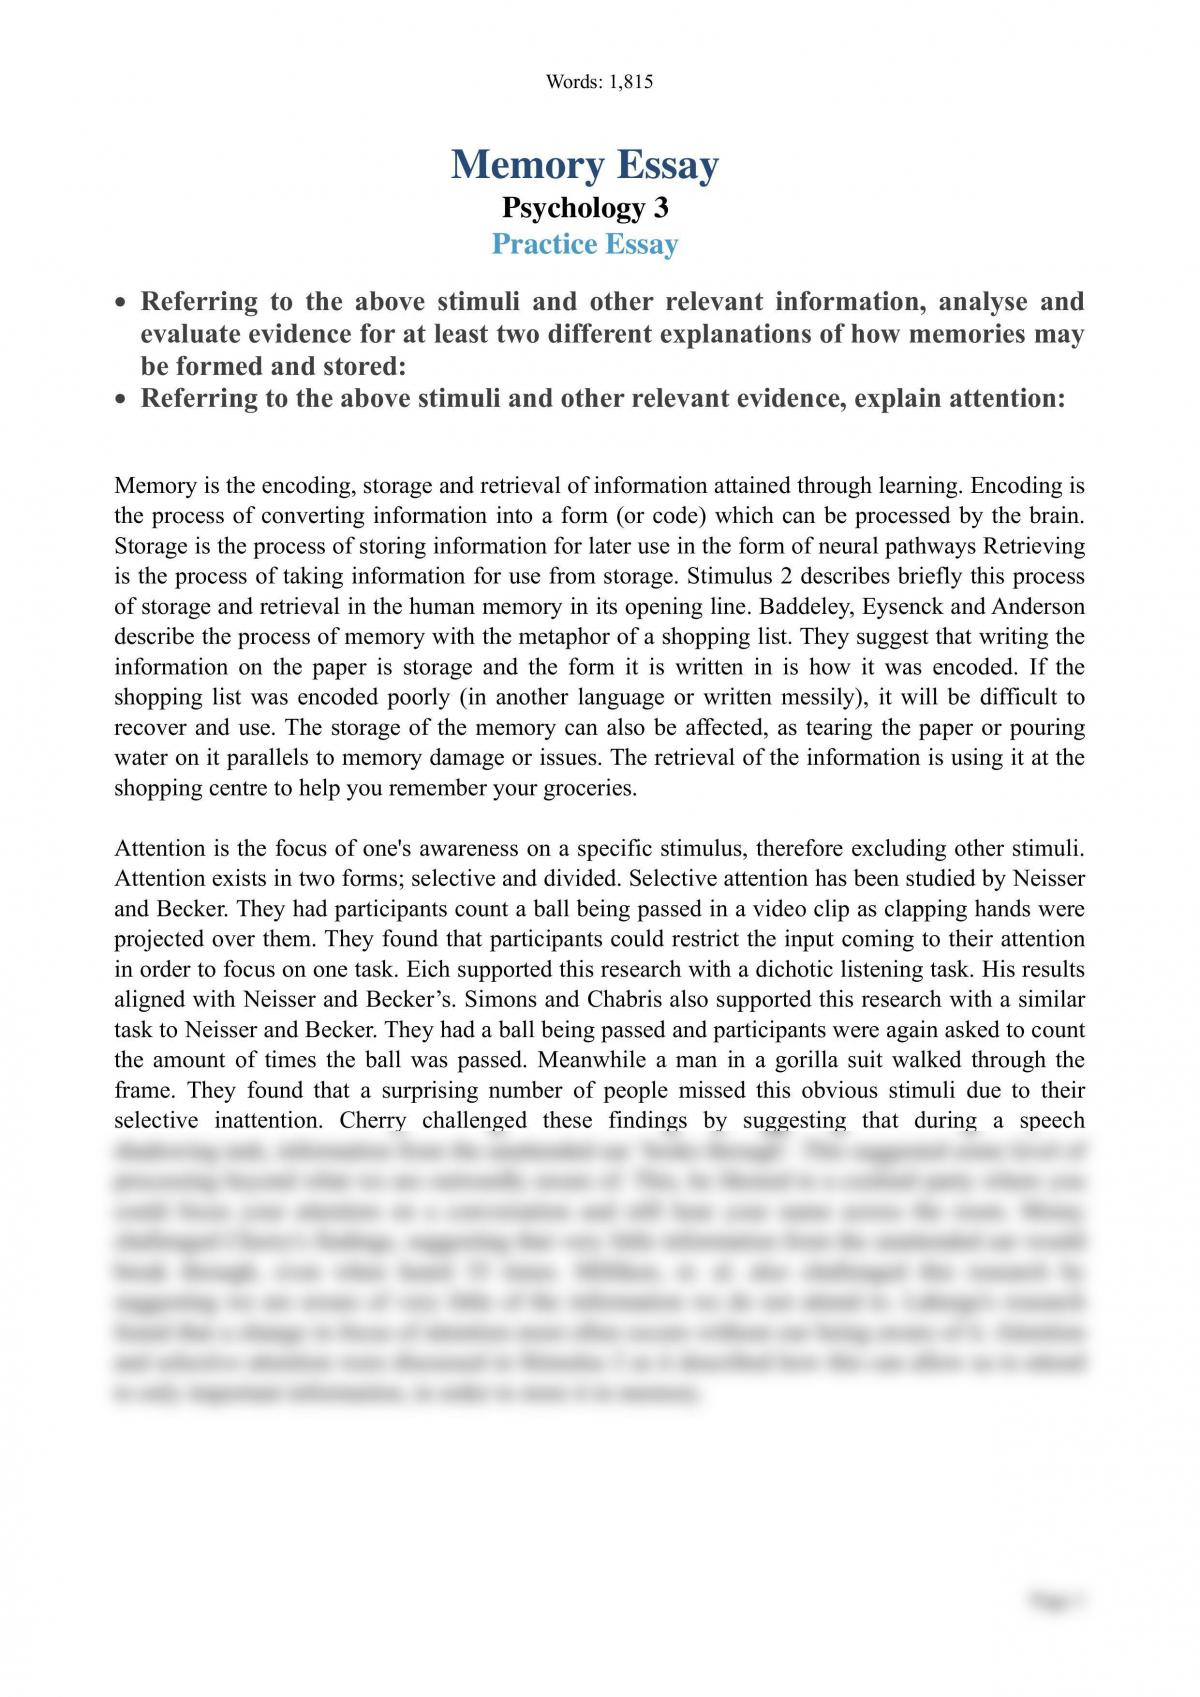 research paper on long memory